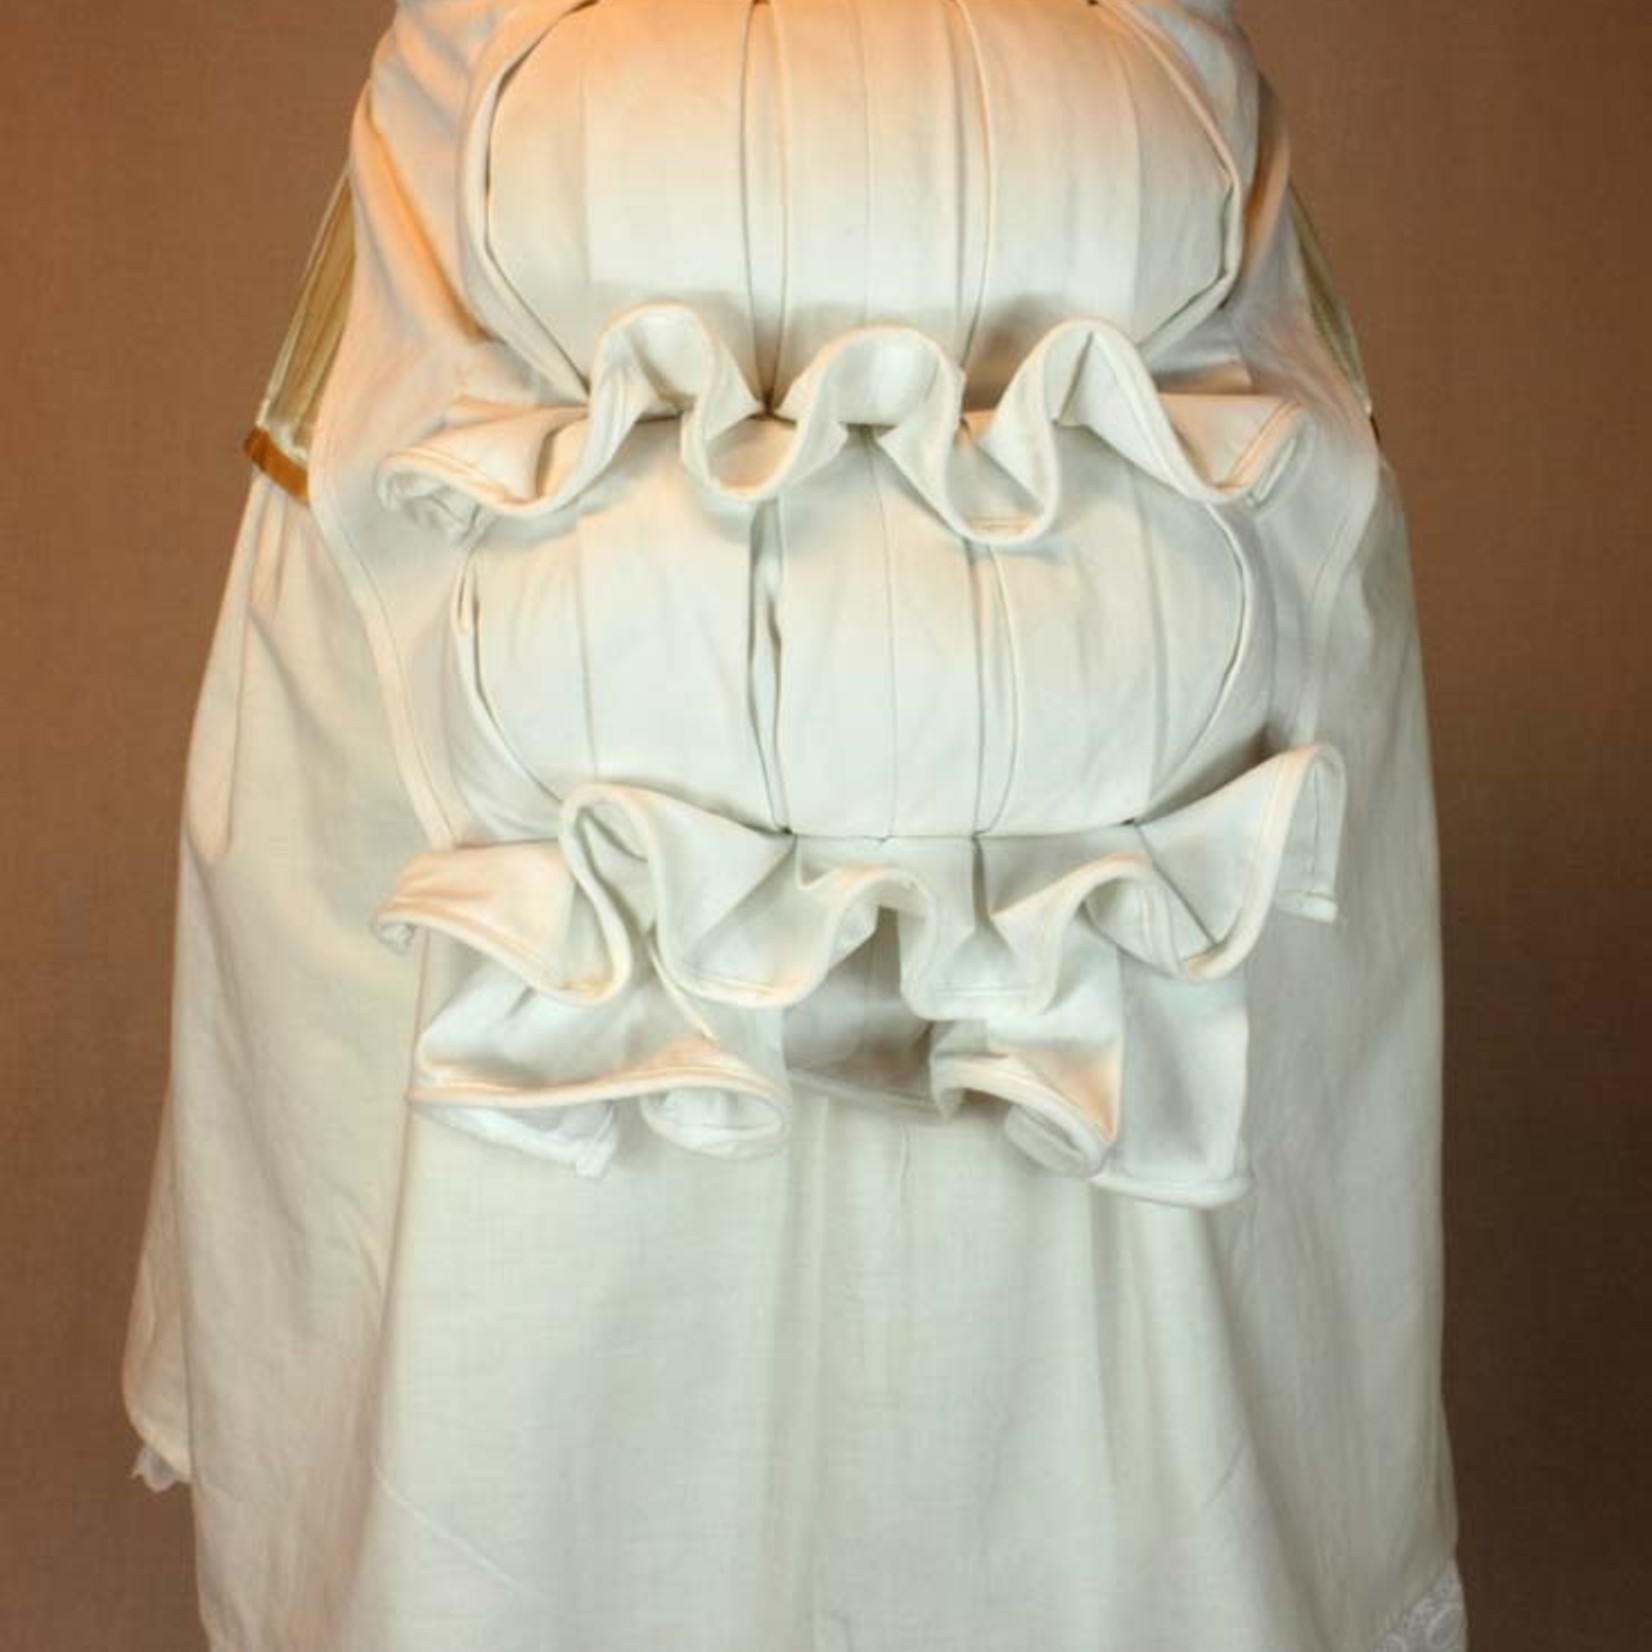 Victorian corset toile class work submission #pafaabuja branch